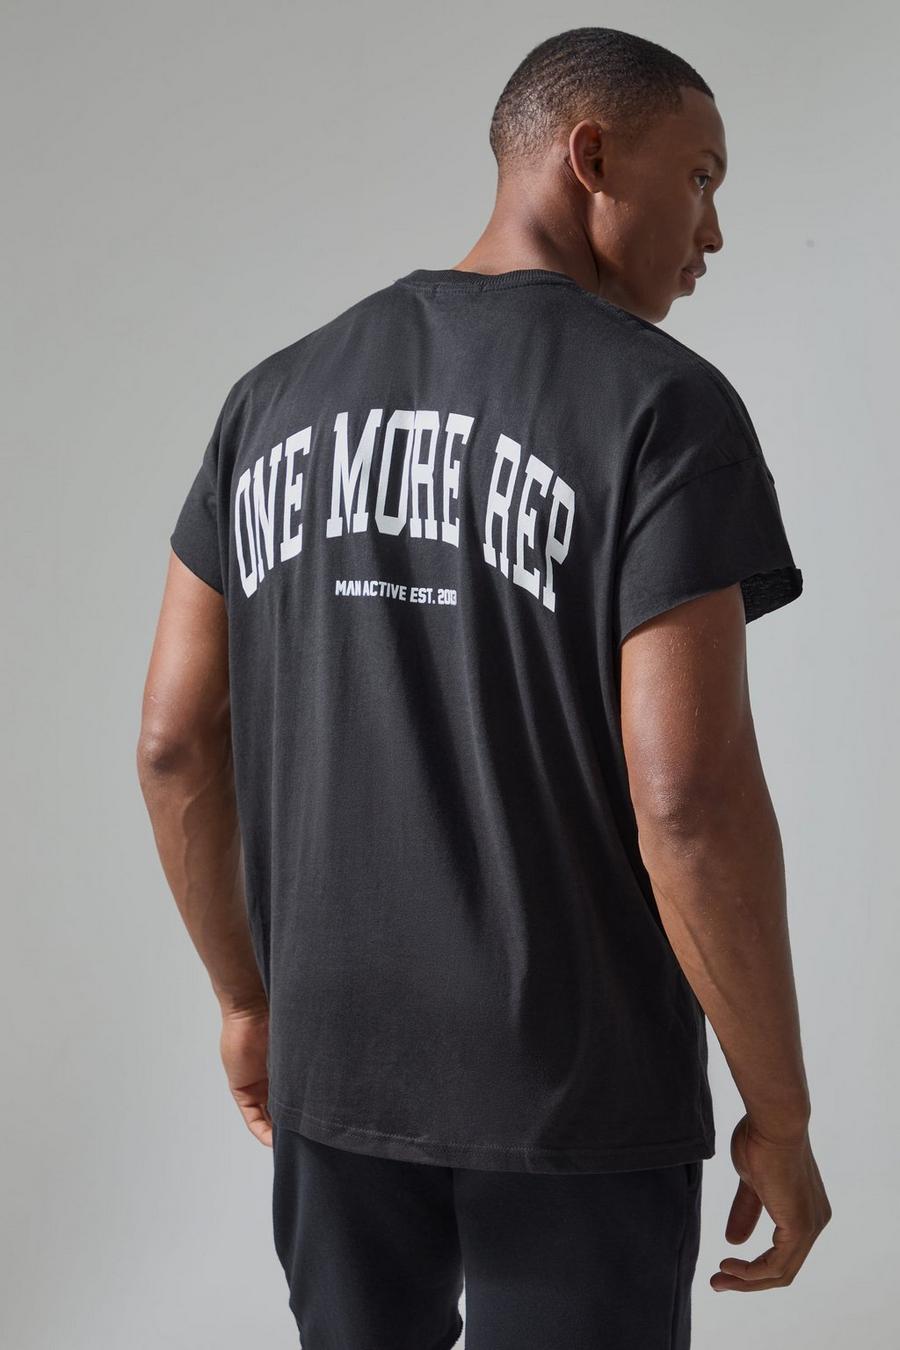 Black Man Active Oversized One More Rep T-Shirt image number 1